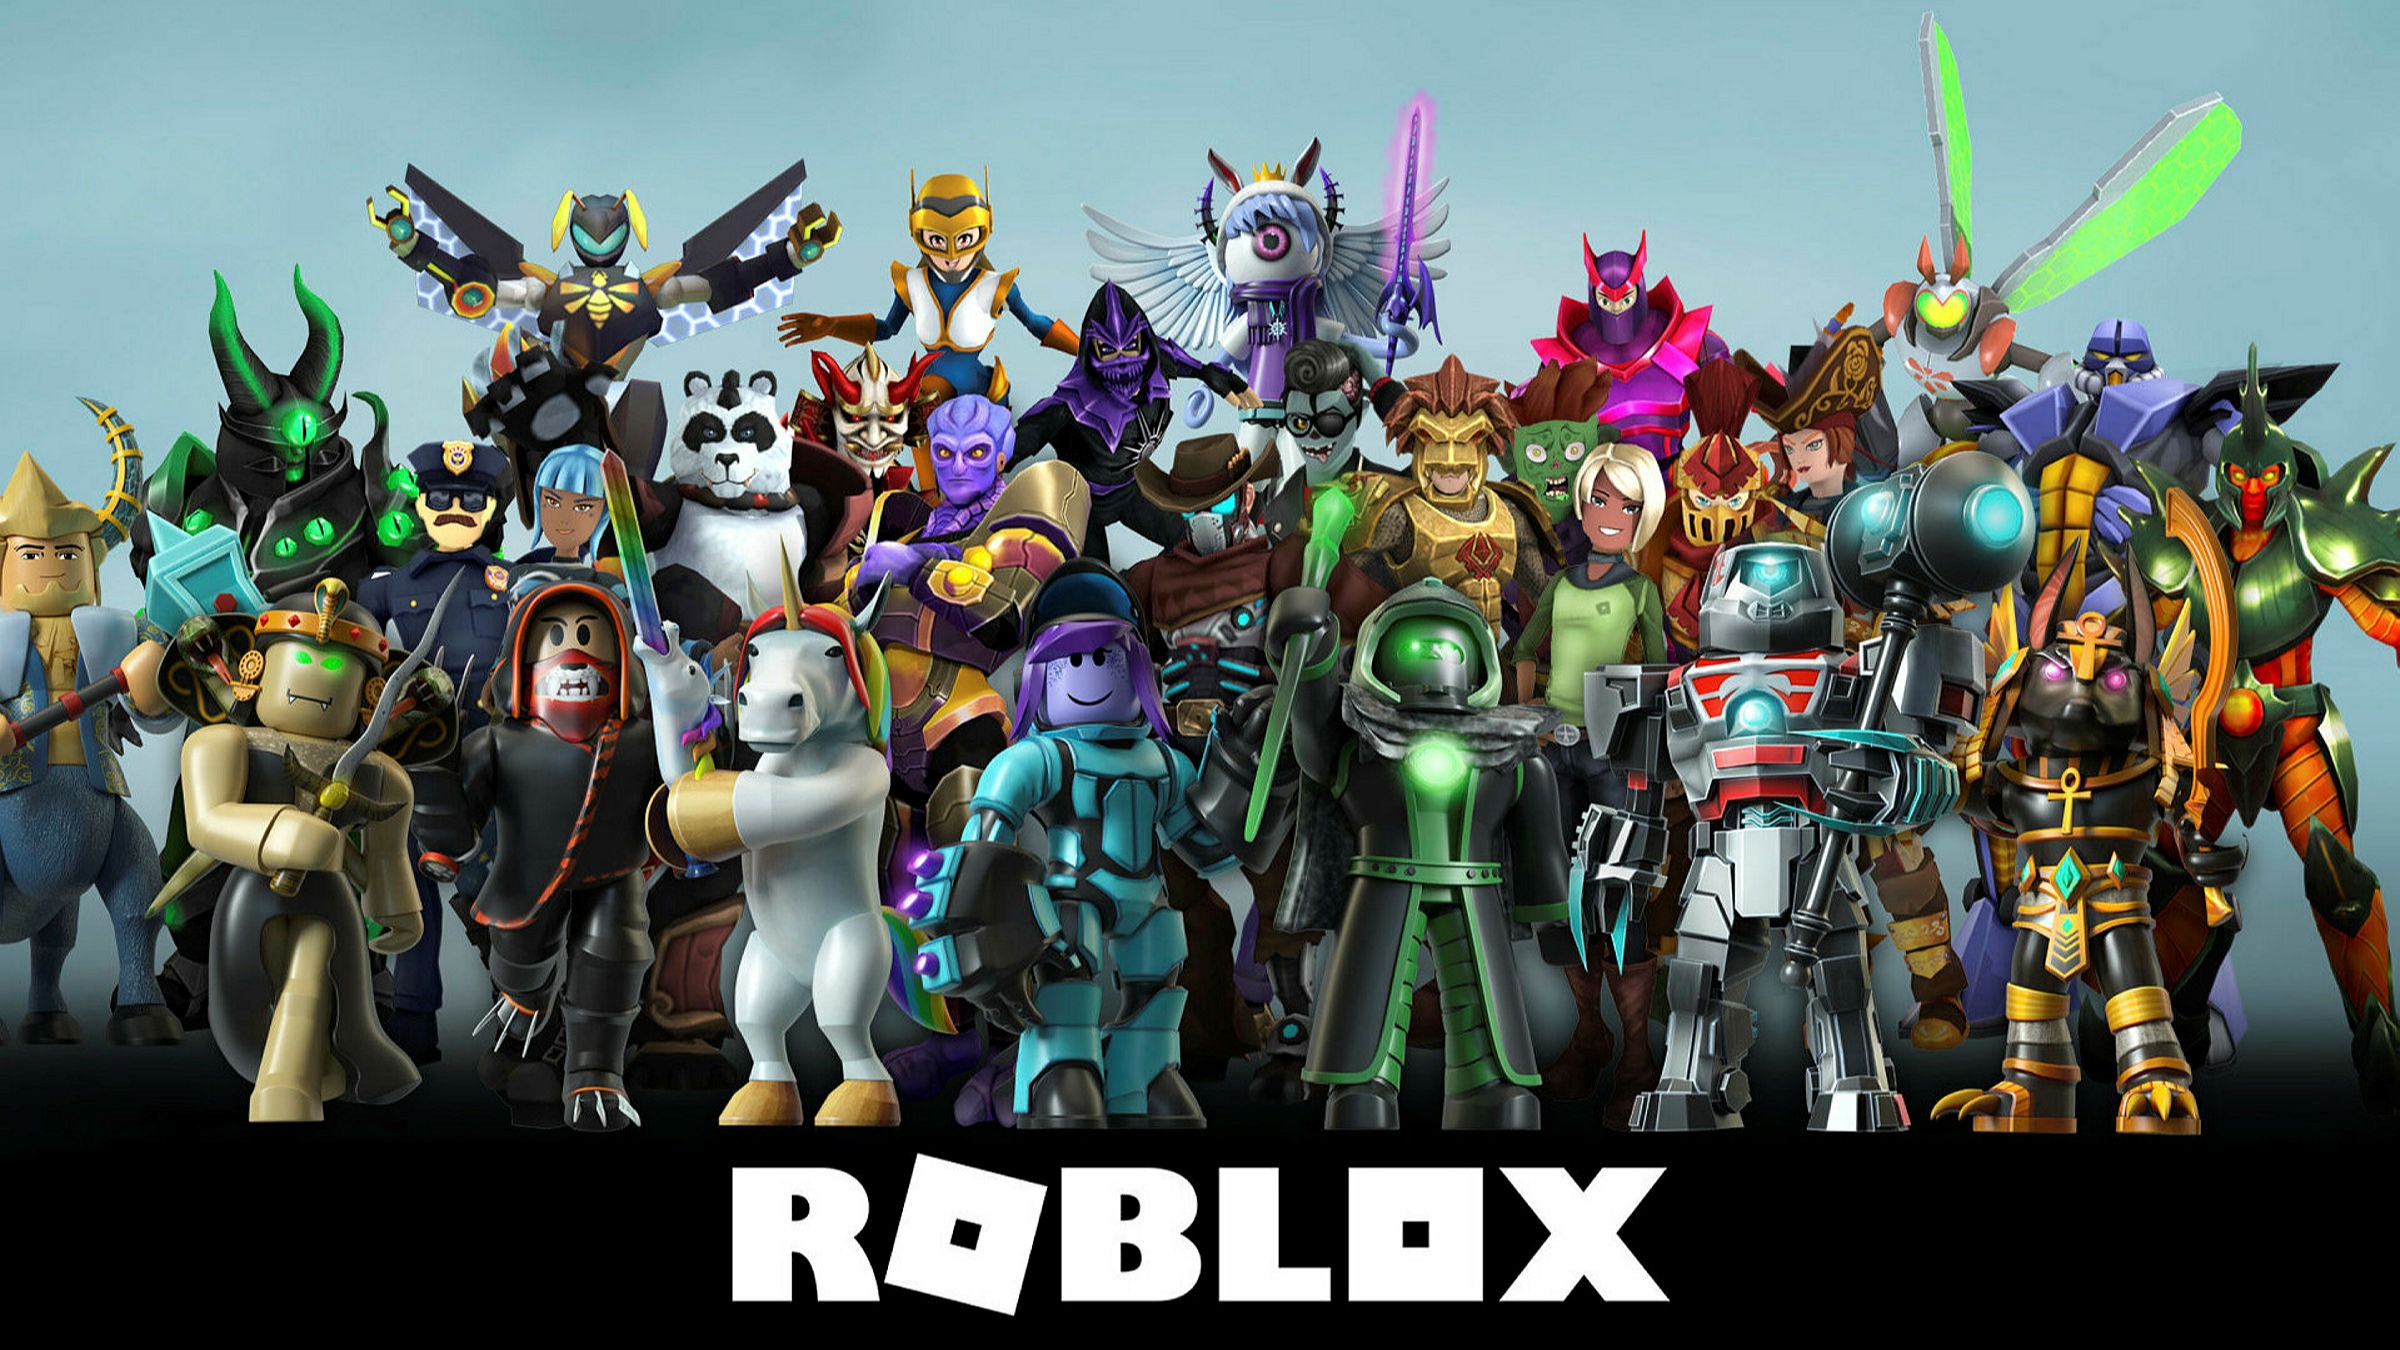 Video Games Top List Of Pocket Money Spending In Lockdown Financial Times - good roblox survival games 2020